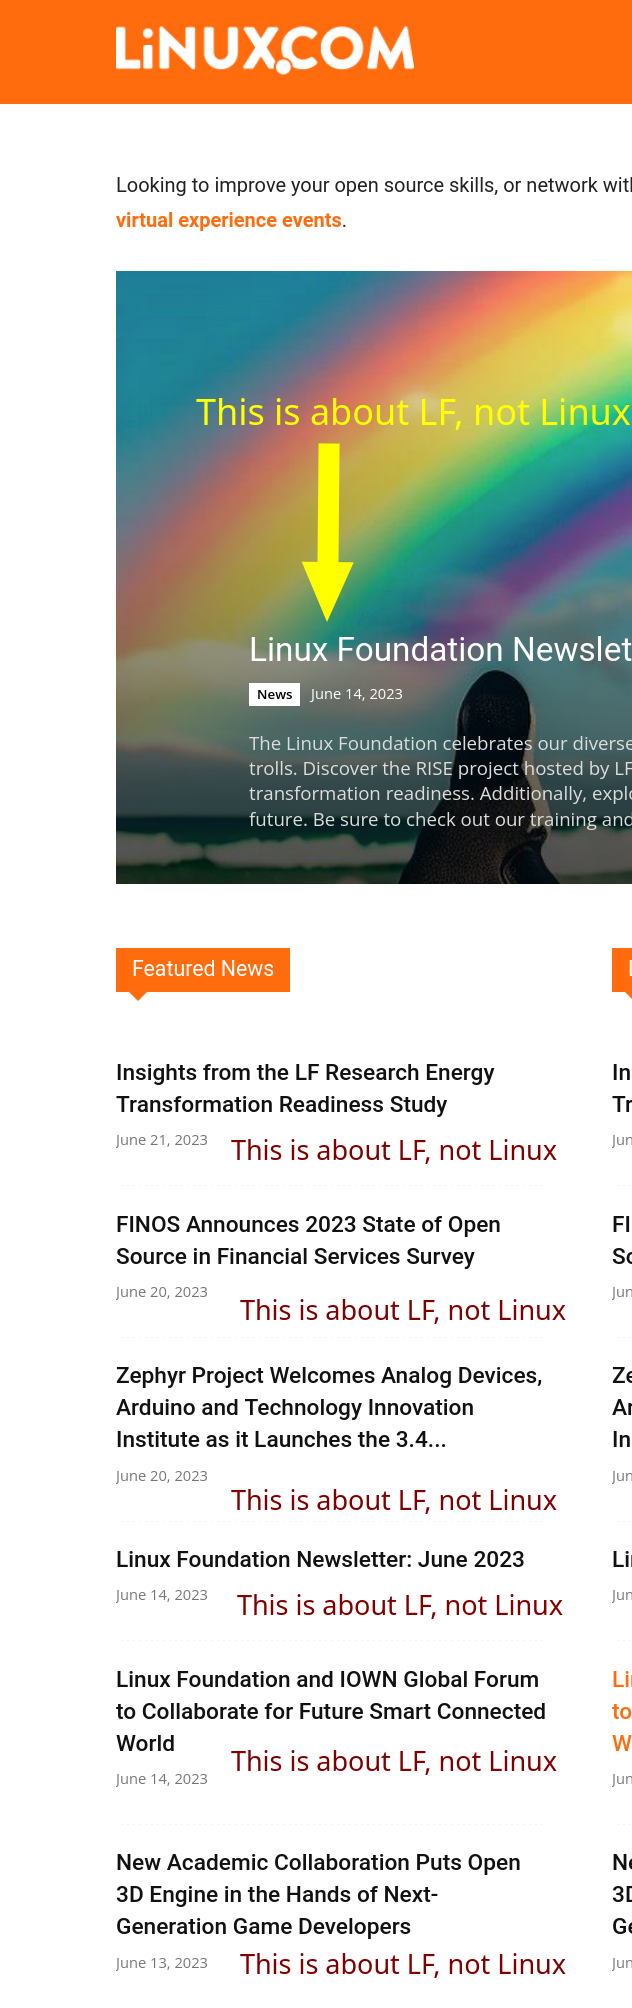 Linux.com: This is about LF, not Linux